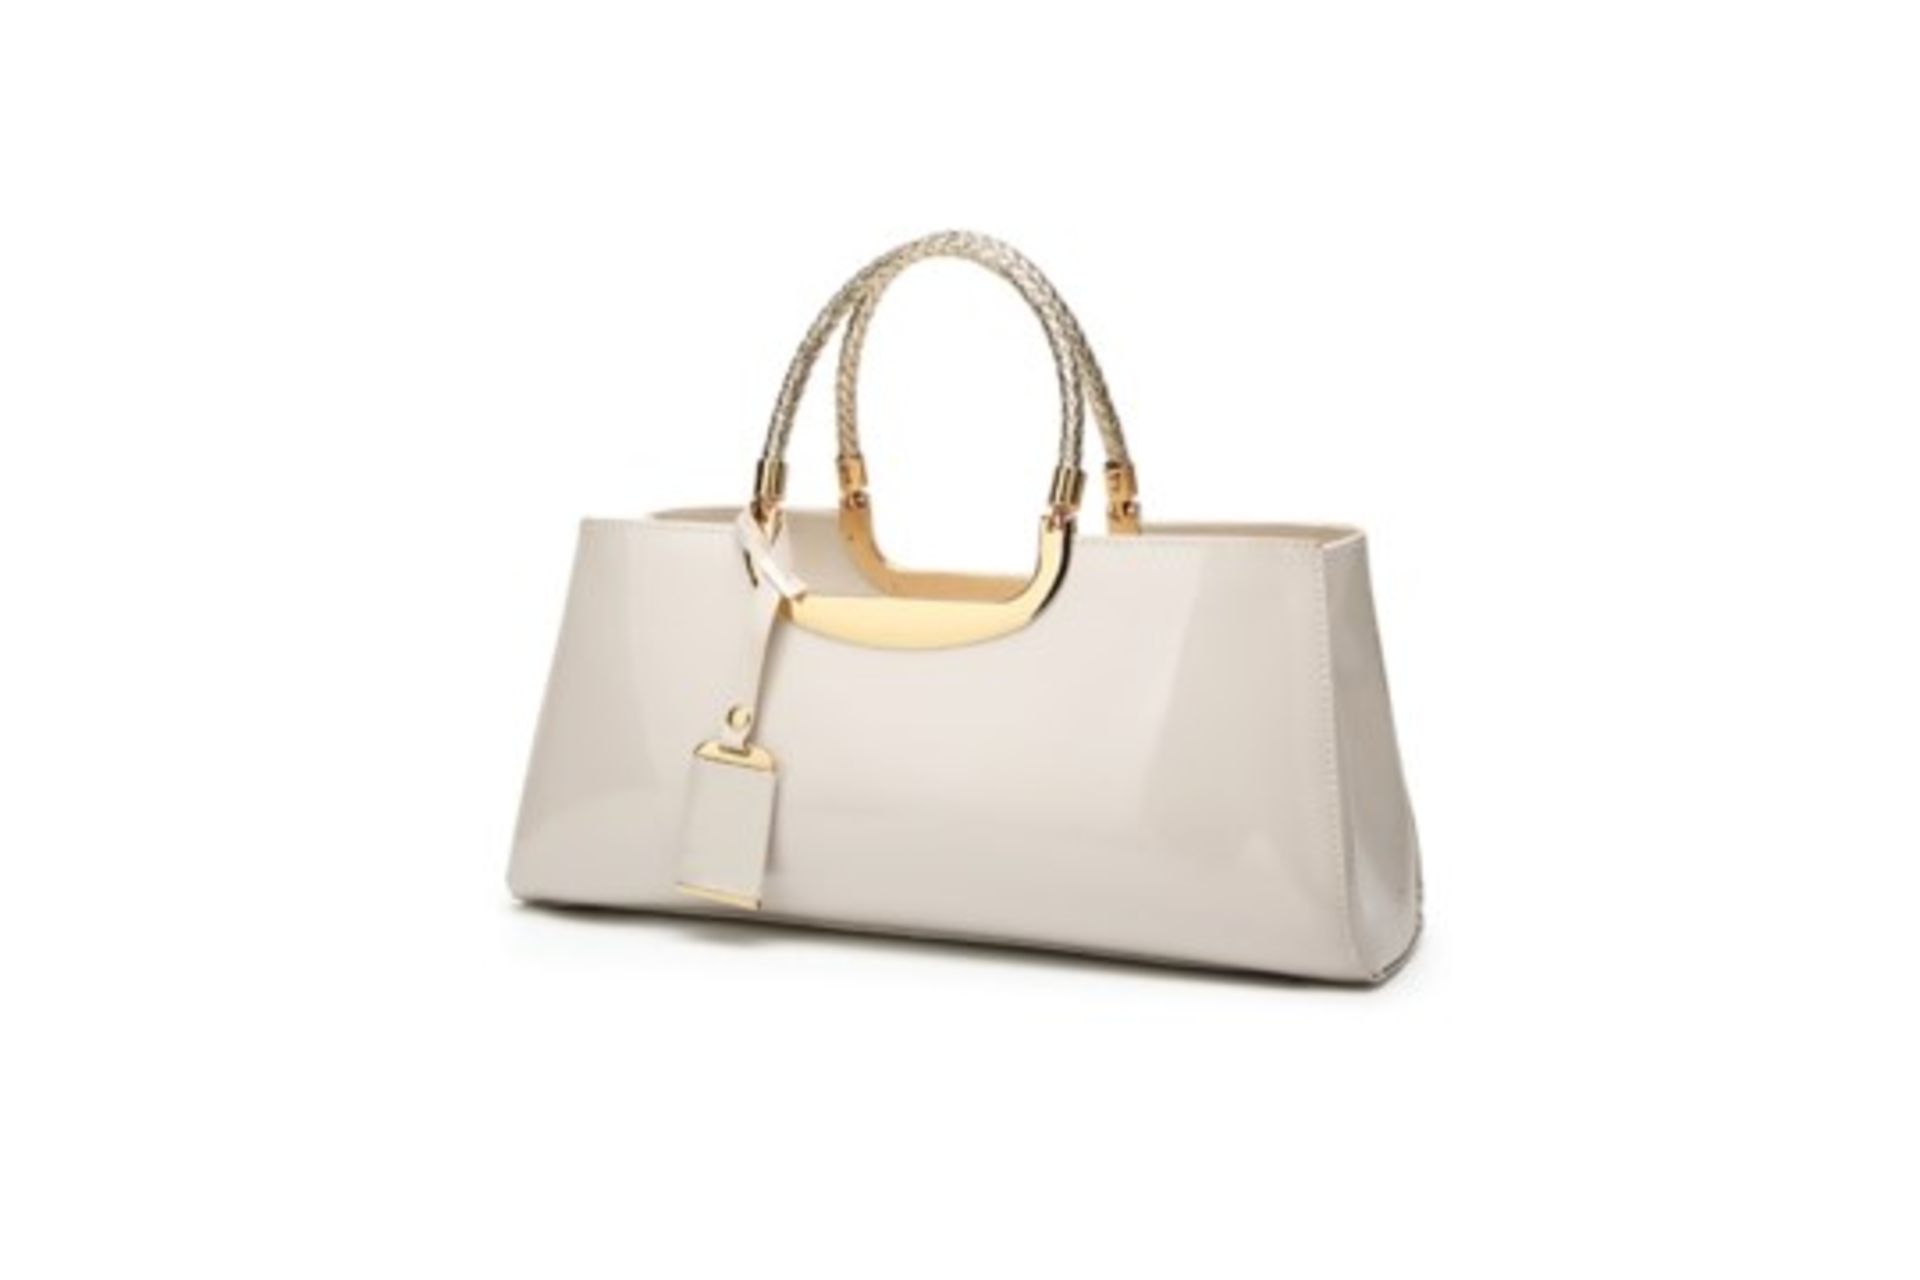 Brand New Womens Coolives Light Golden Strap Party Bag in White RRP £54.99